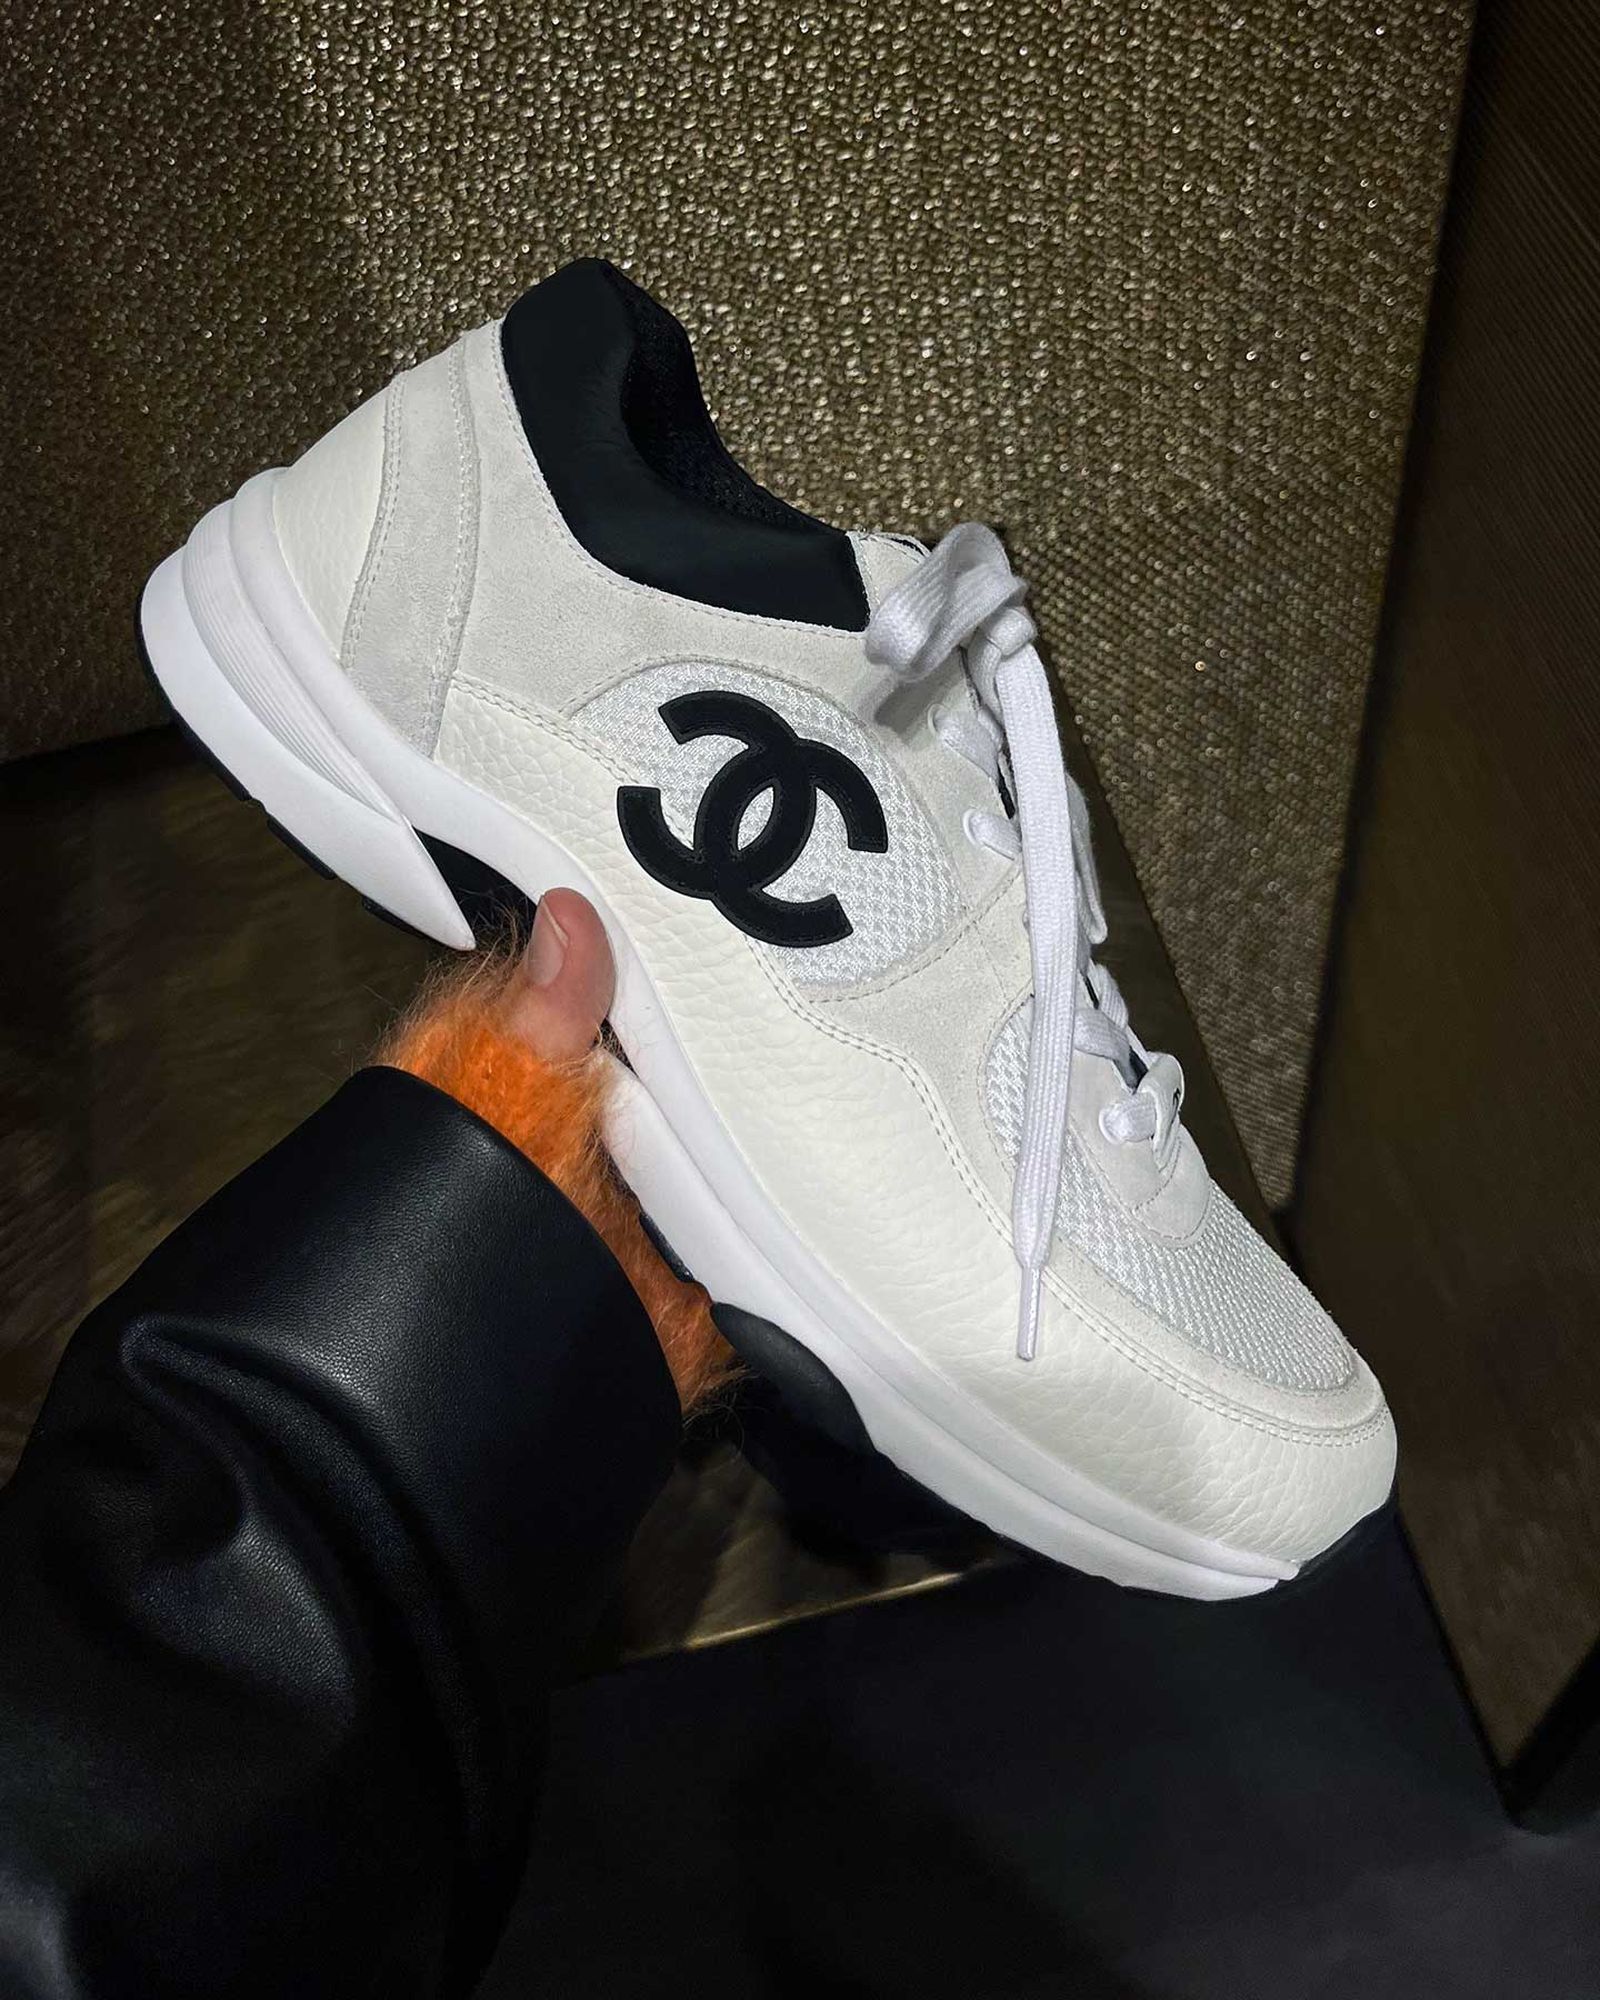 How To Spot Fake Chanel Shoes For Guys